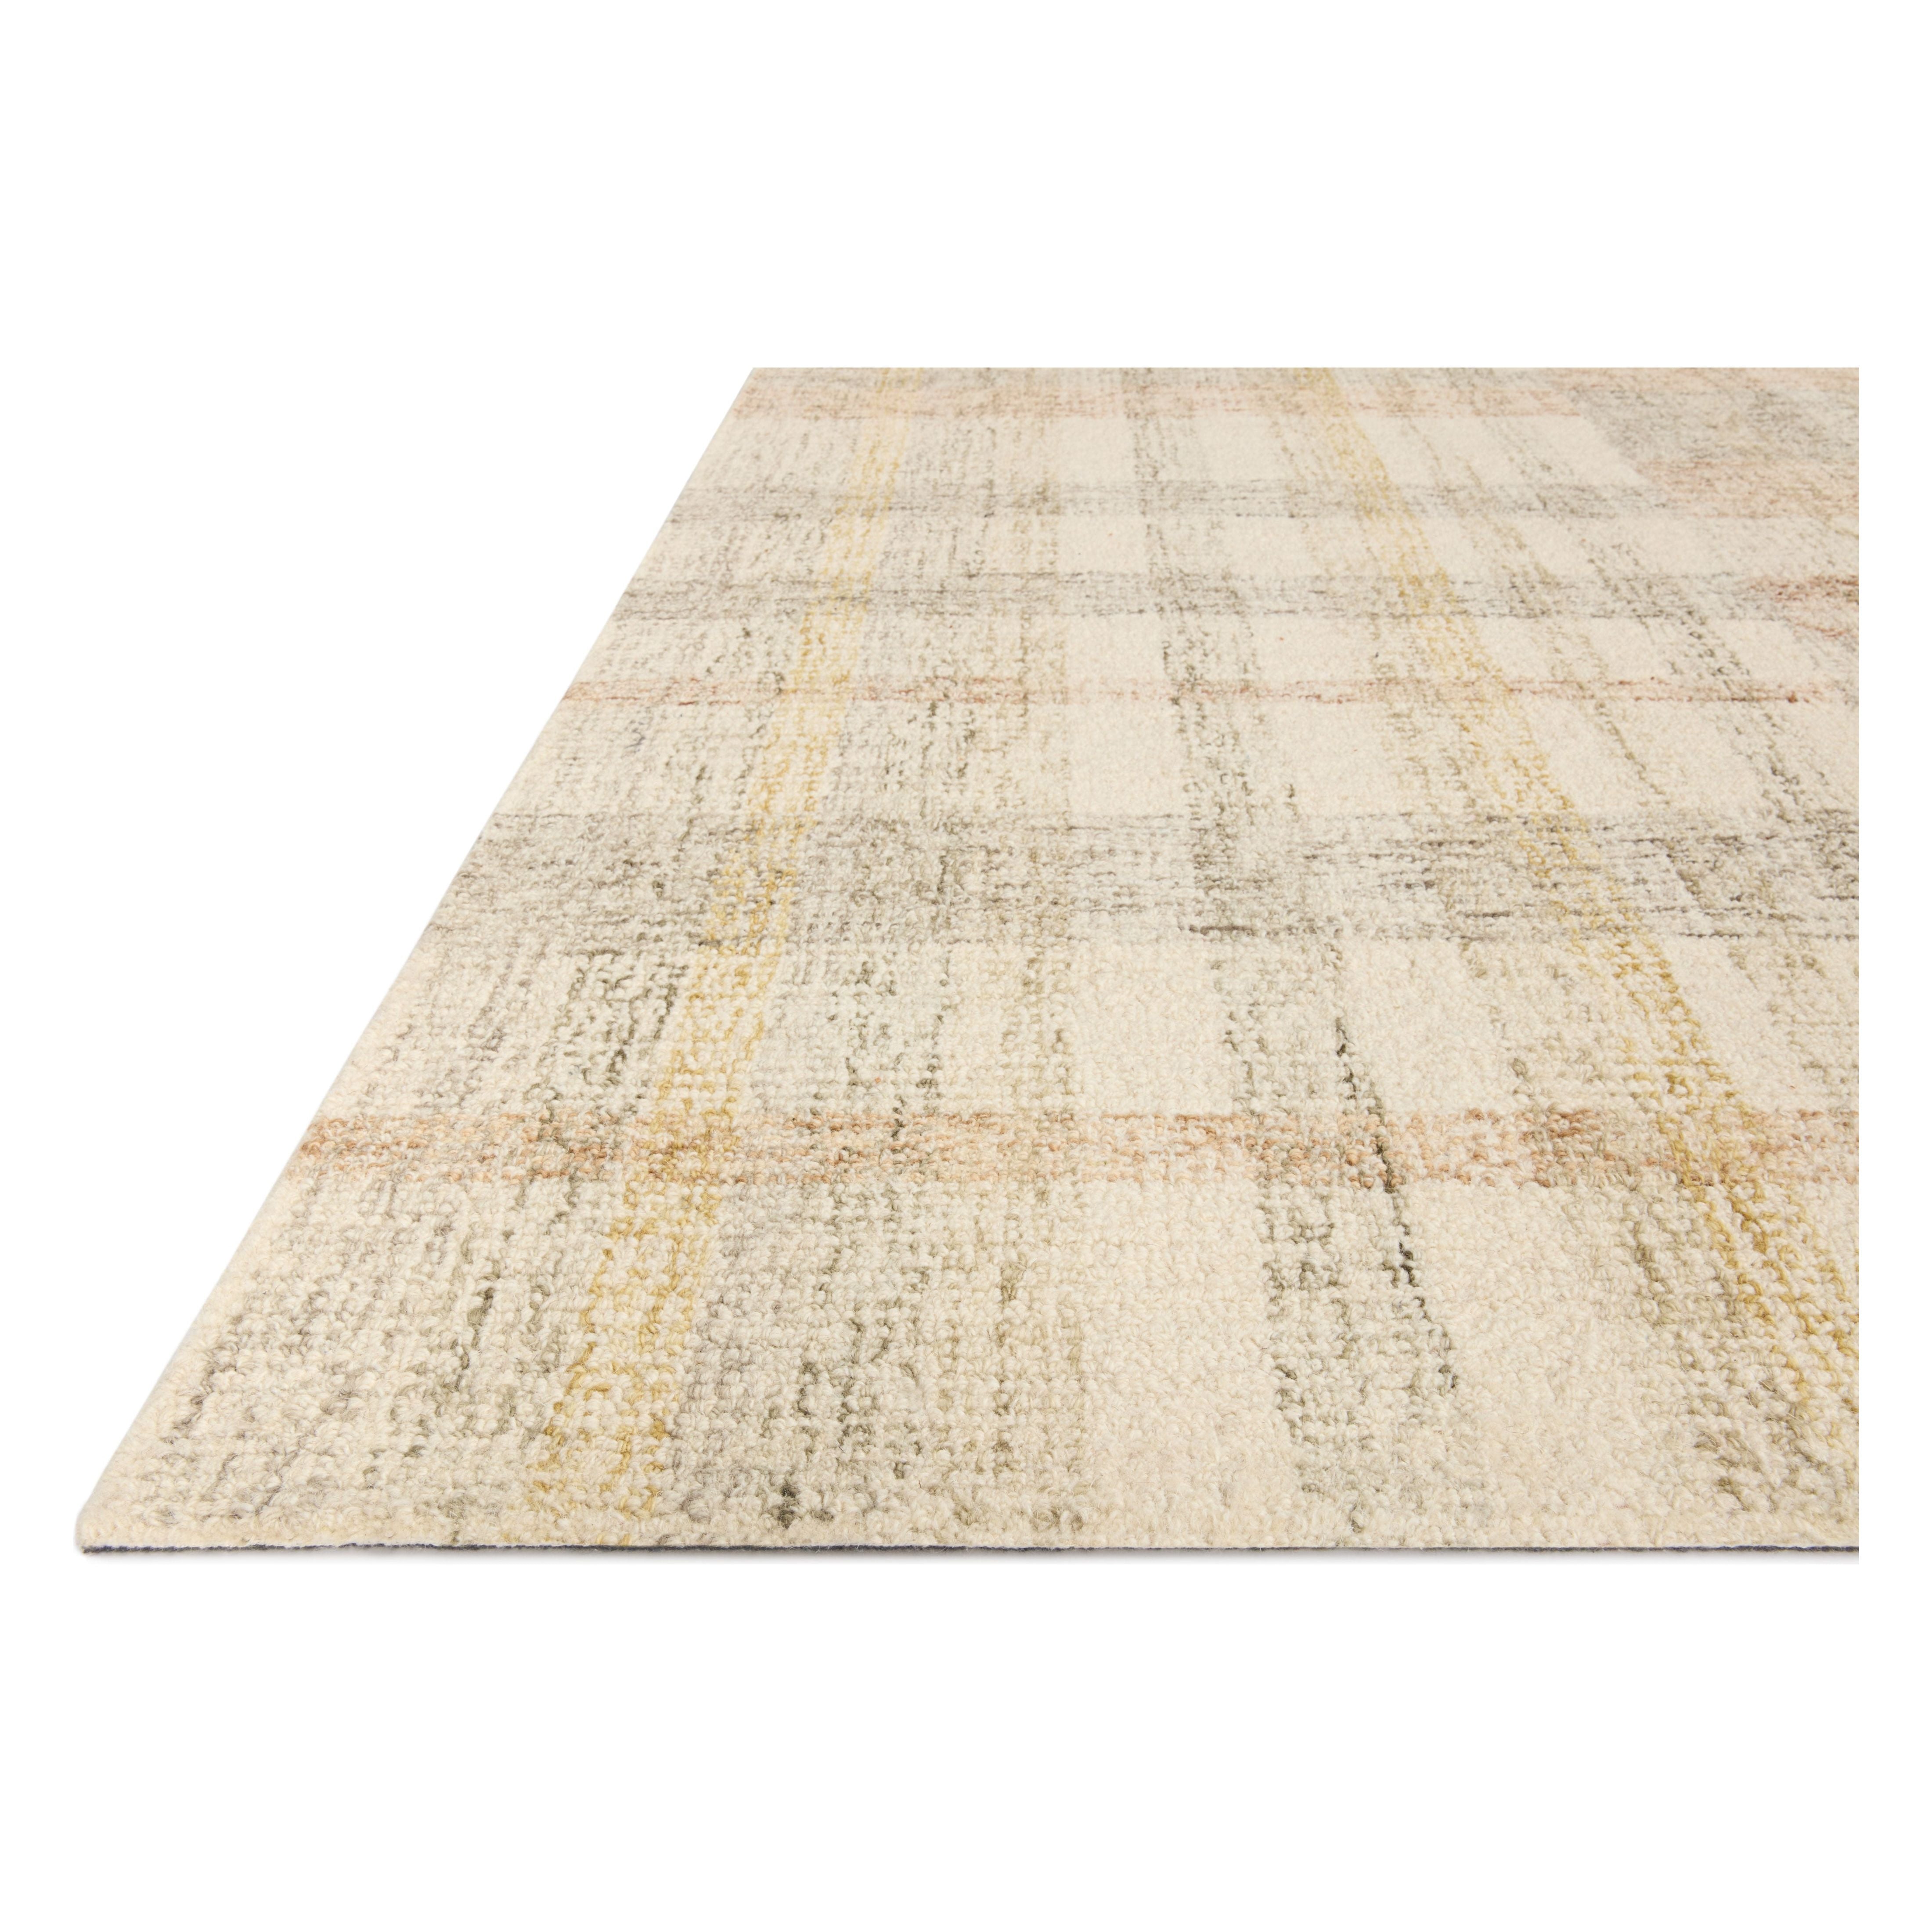 This rug nails the balance of a light + bright rug with a warm aesthetic. Reminiscent of our favorite casual, vintage striped hemp rugs, the Chris Natural / Multi rug will give a curated look to your space. Amethyst Home provides interior design services, furniture, rugs, and lighting in the Seattle metro area.